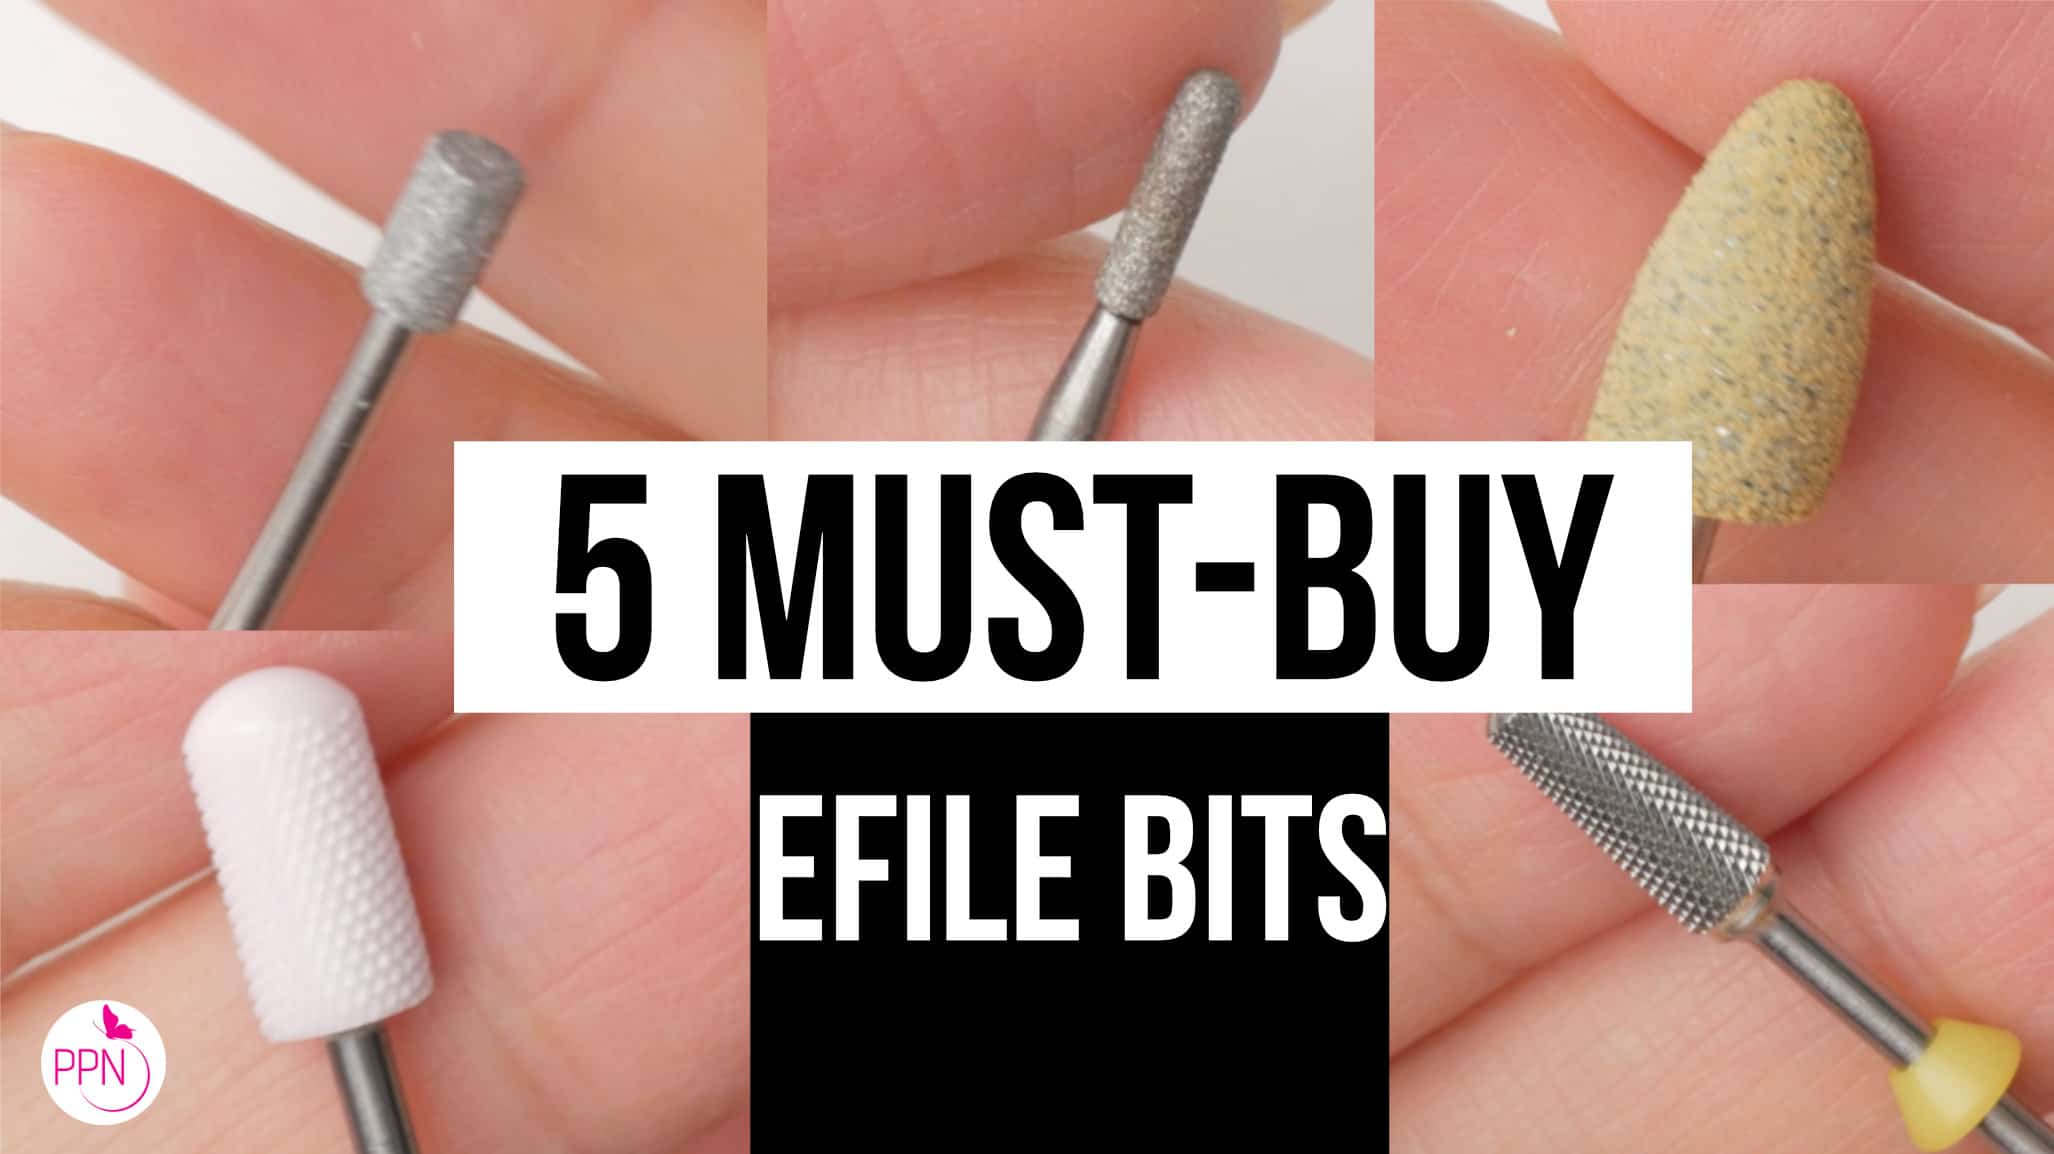 1. How to Use a Nail Drill Bit for Acrylic Nails - wide 6